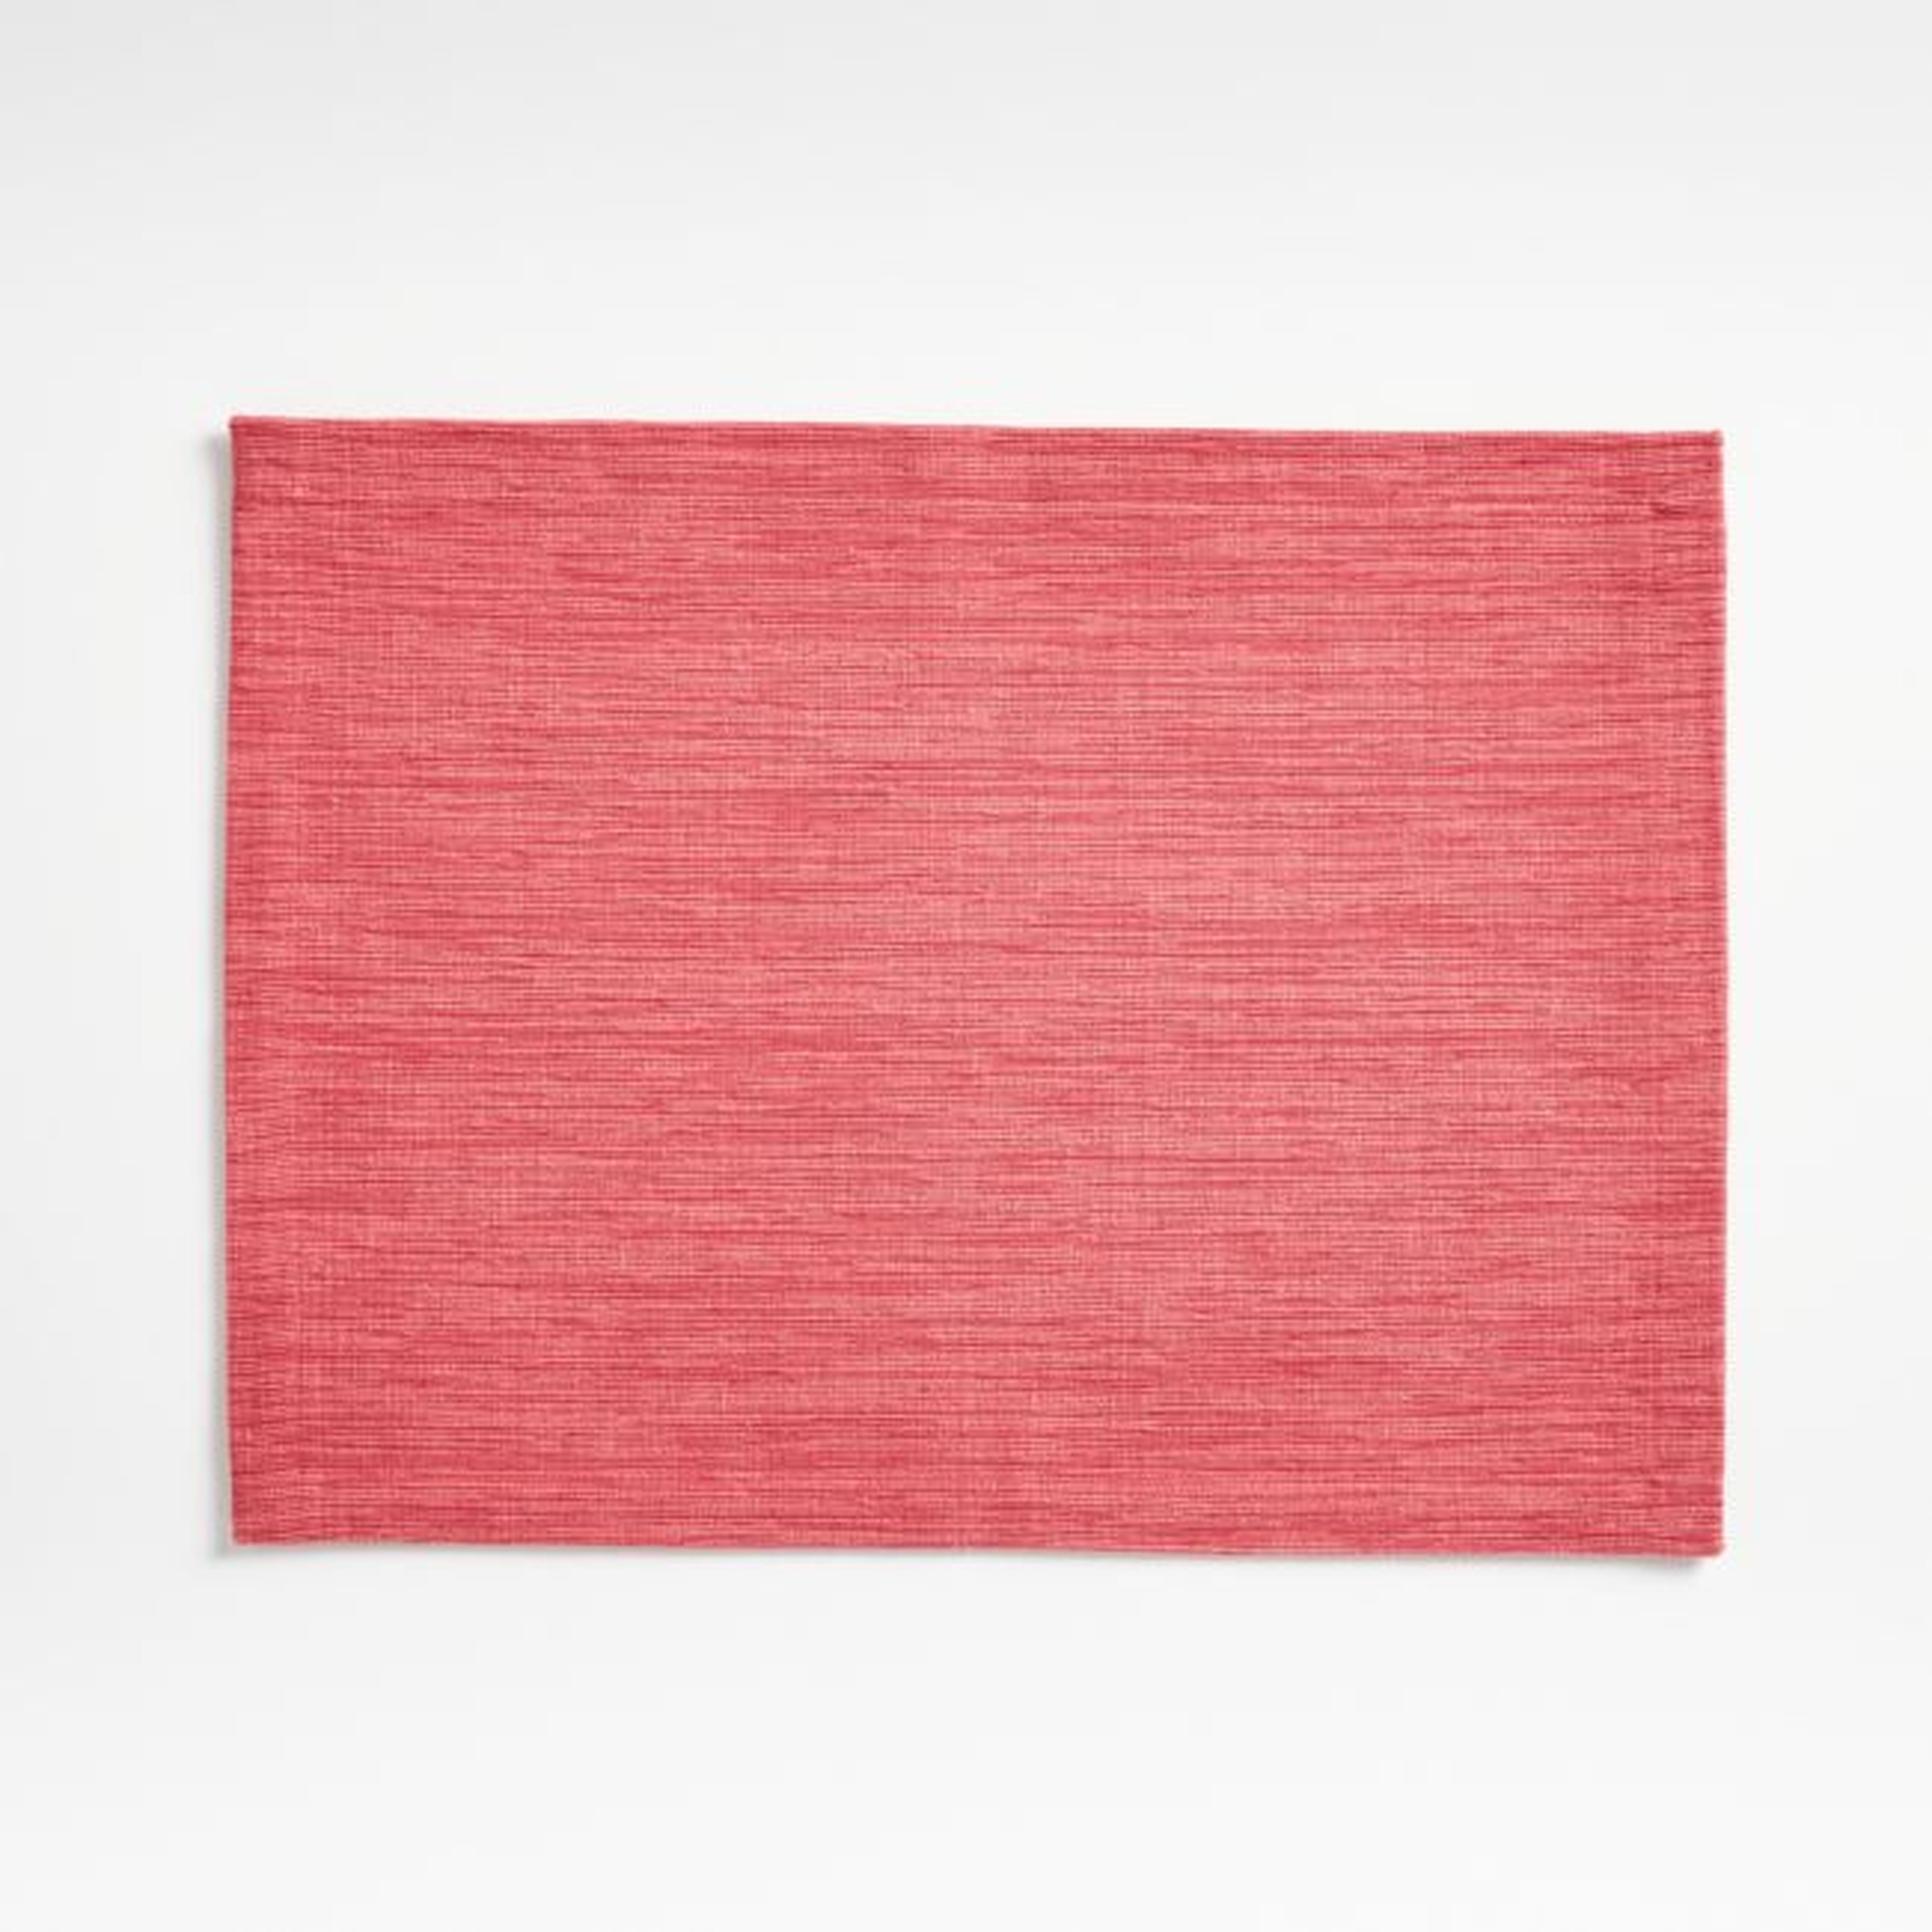 Grasscloth Raspberry Red Cotton Placemat - Crate and Barrel